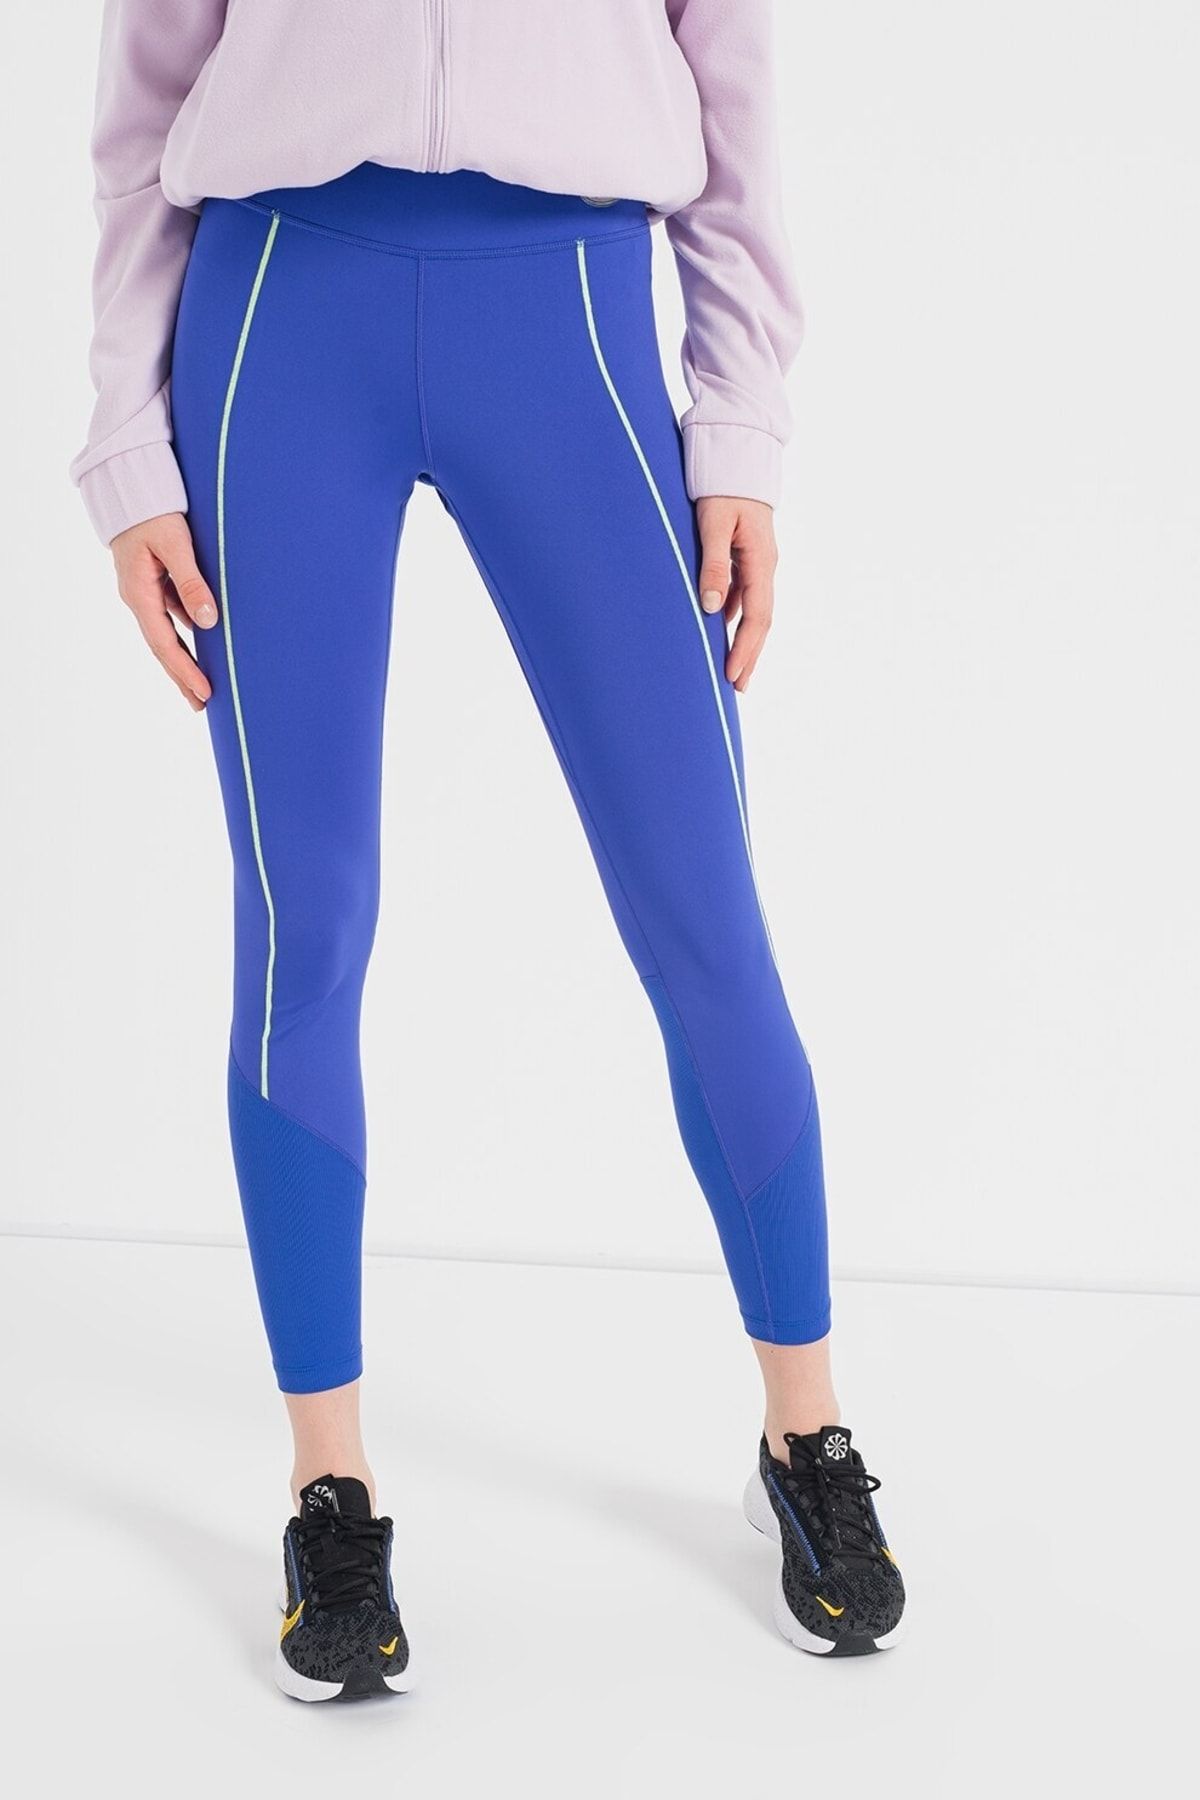 Nike One Luxe Tight Blue